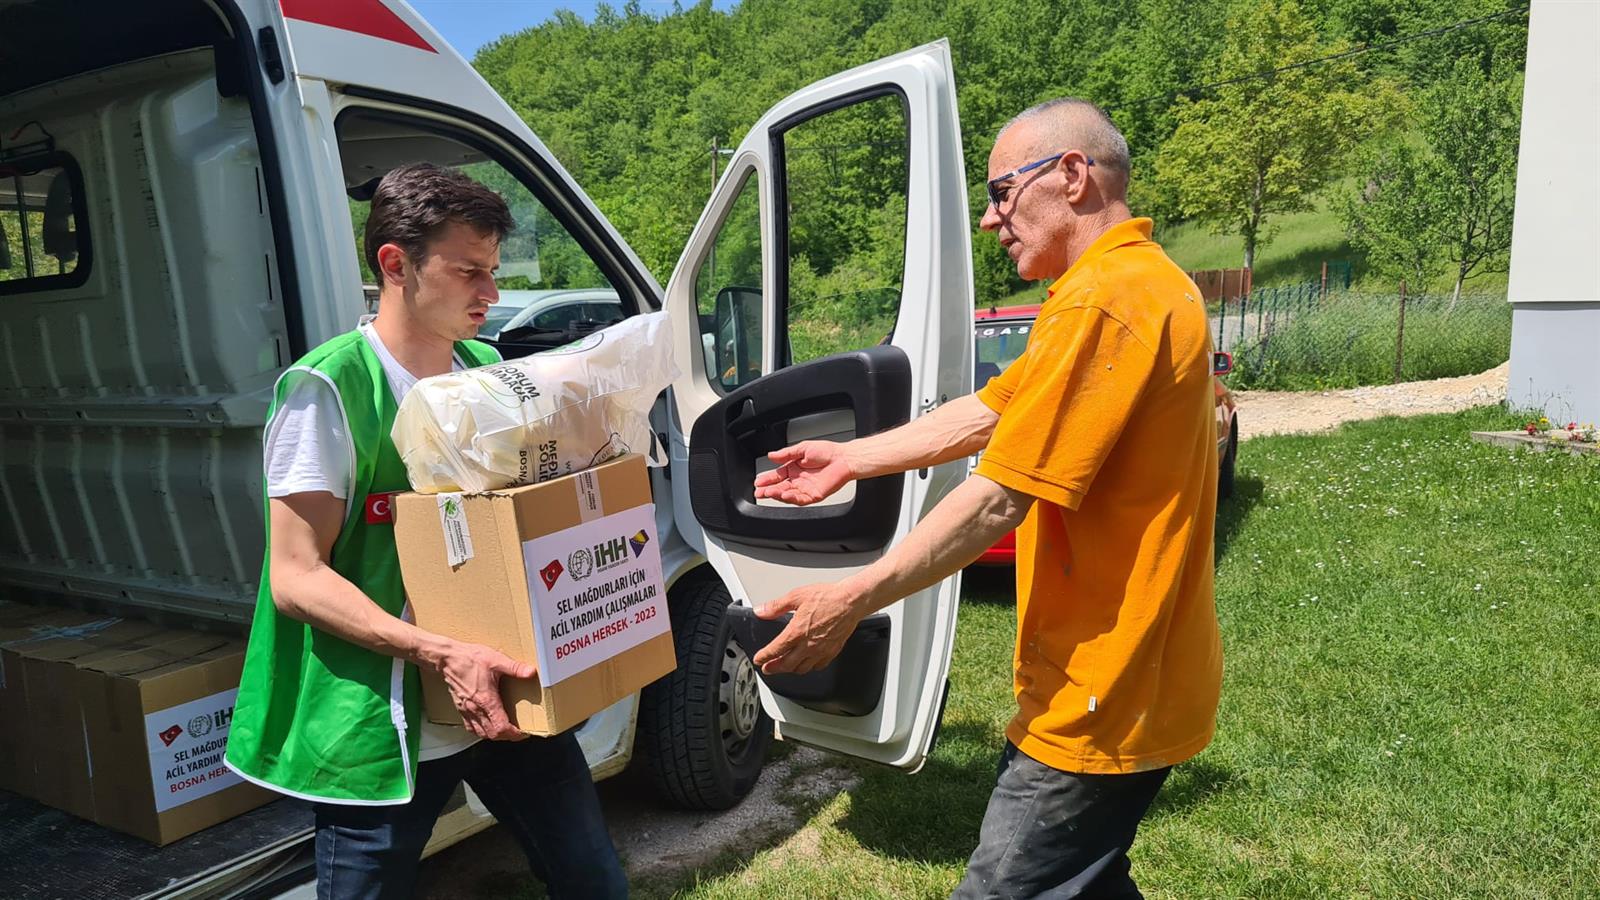 IHH launched an aid campaign after the flood in Bosnia